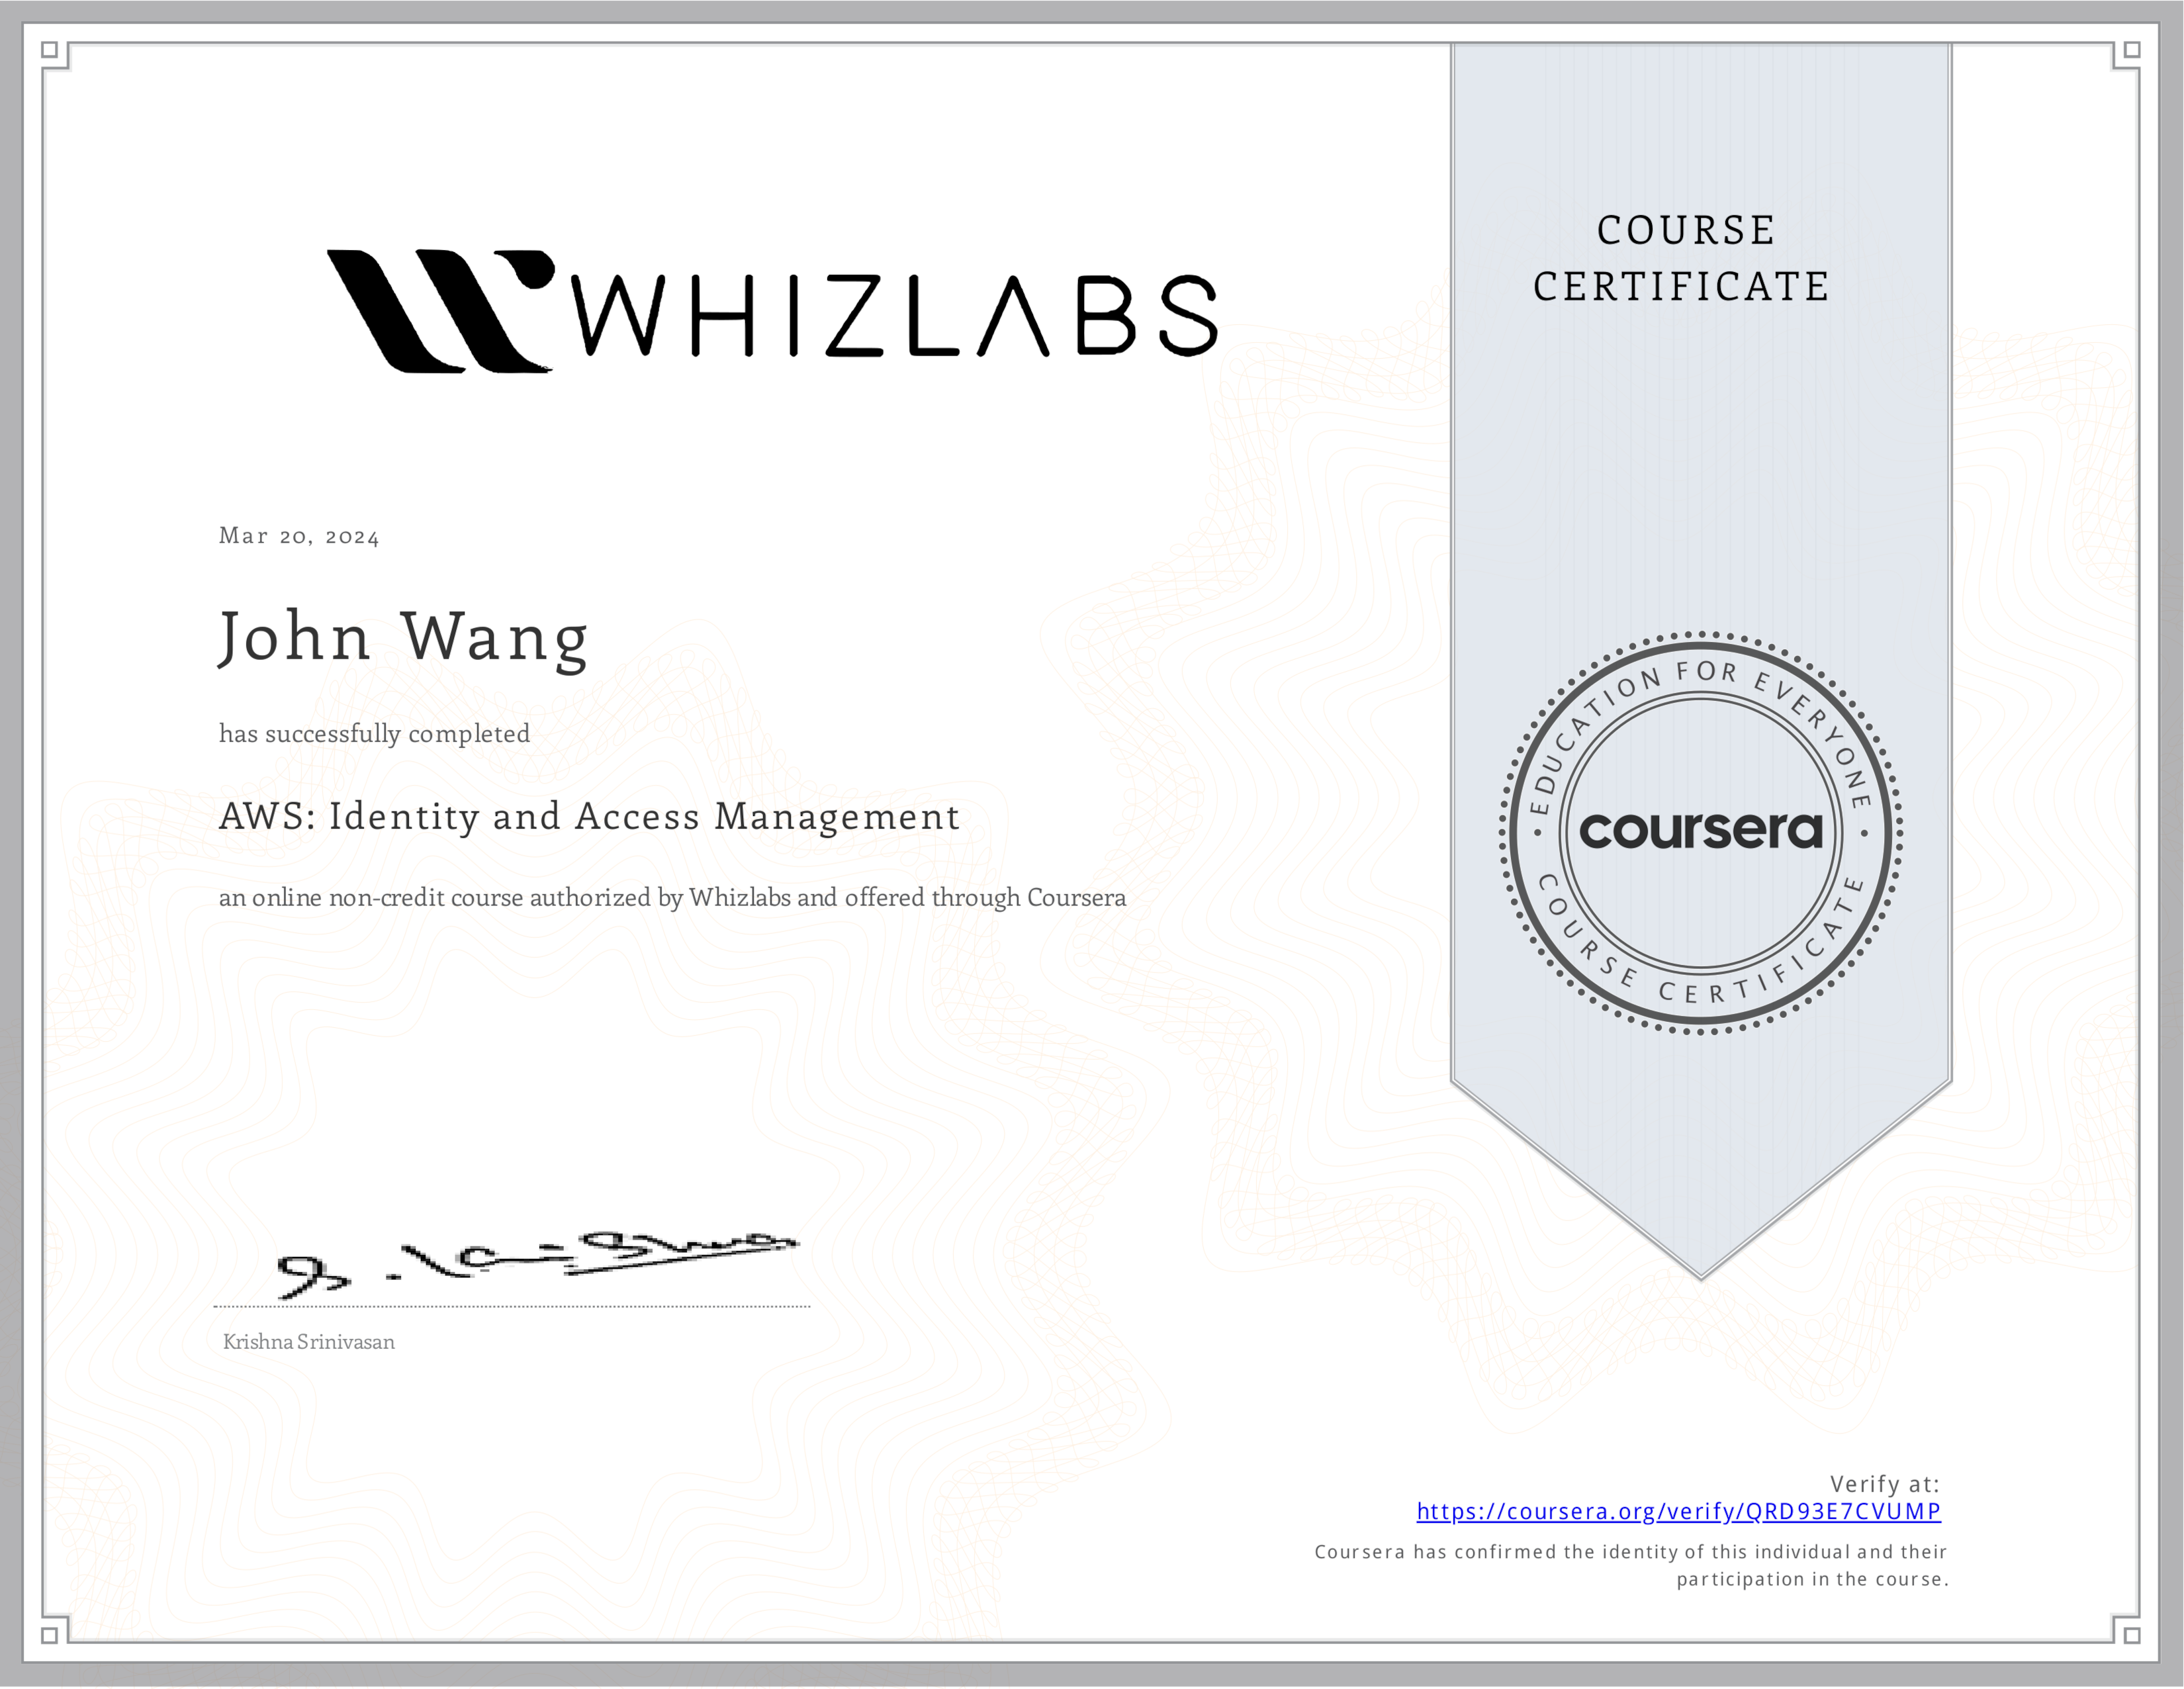 John's AWS: Identity and Access Management from Whizlabs